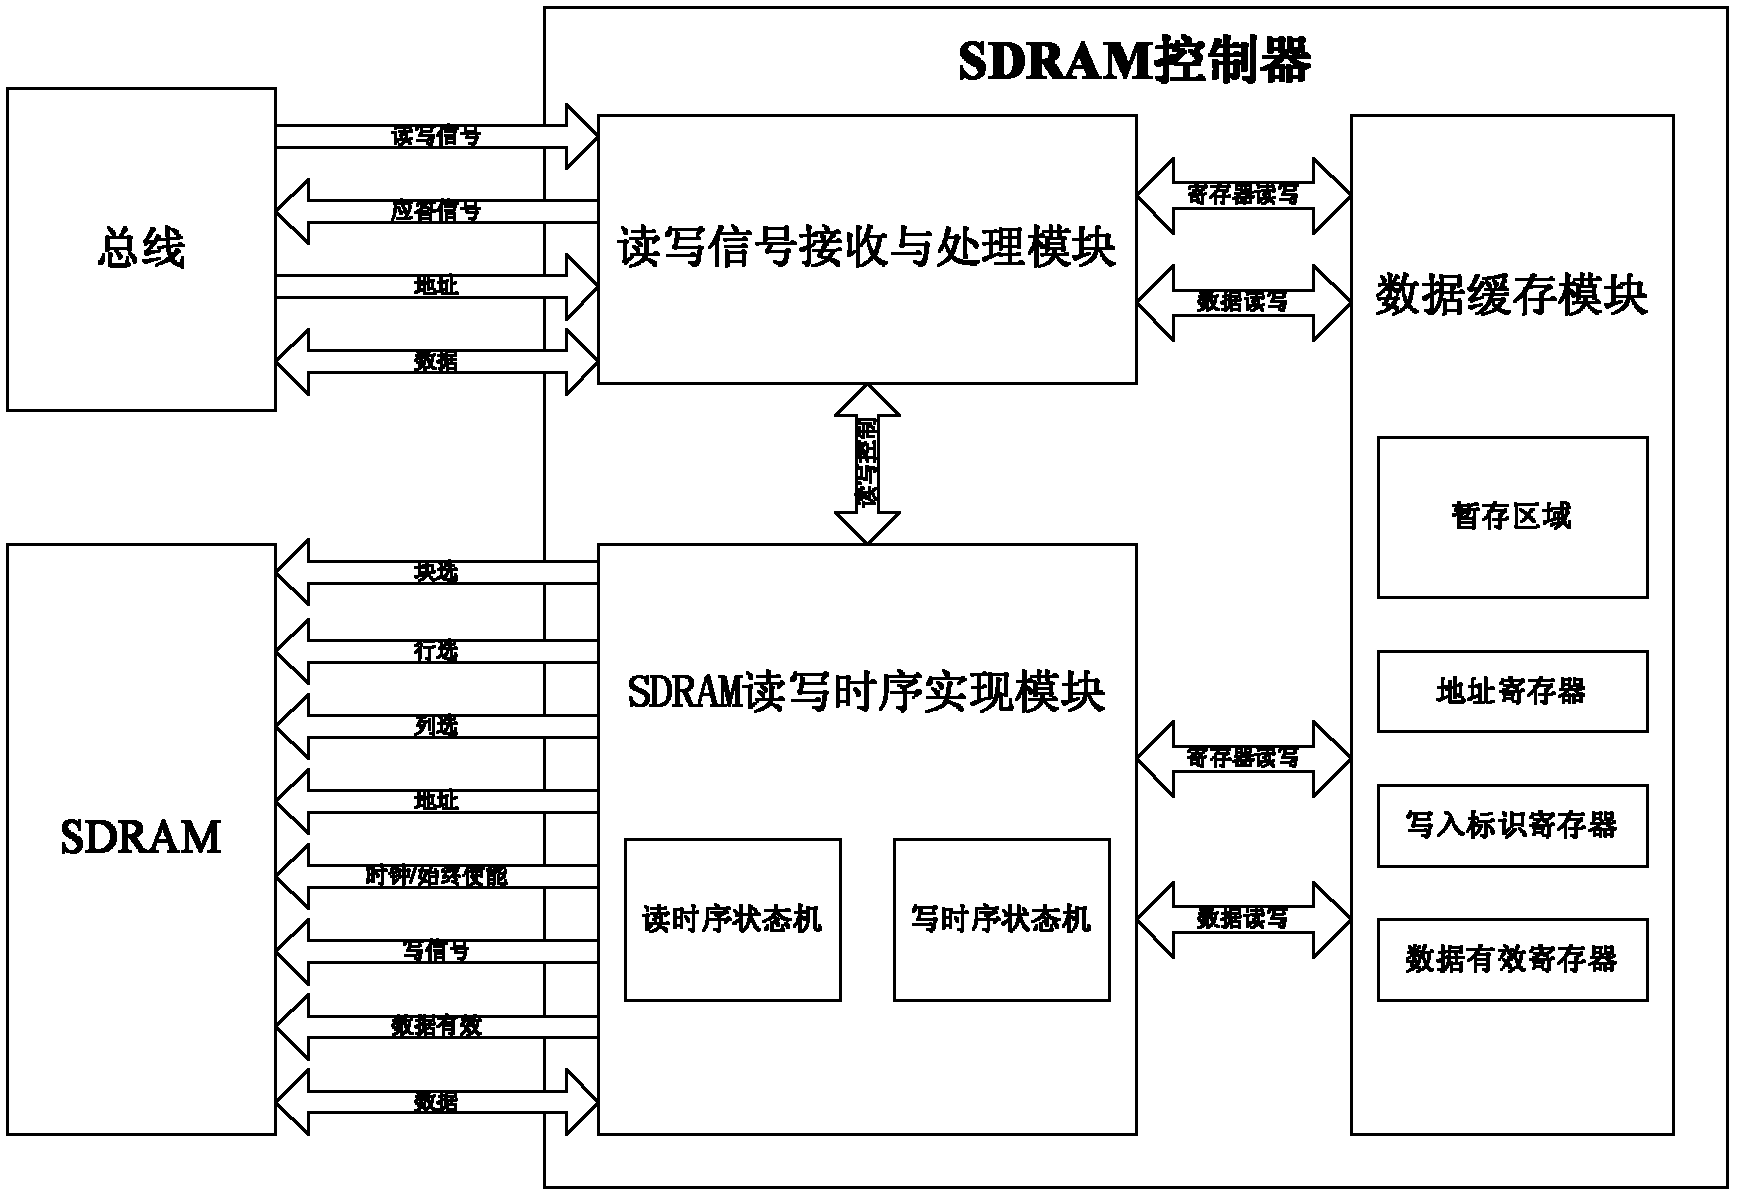 SDRAM (synchronous dynamic random access memory) controller and operating method for same